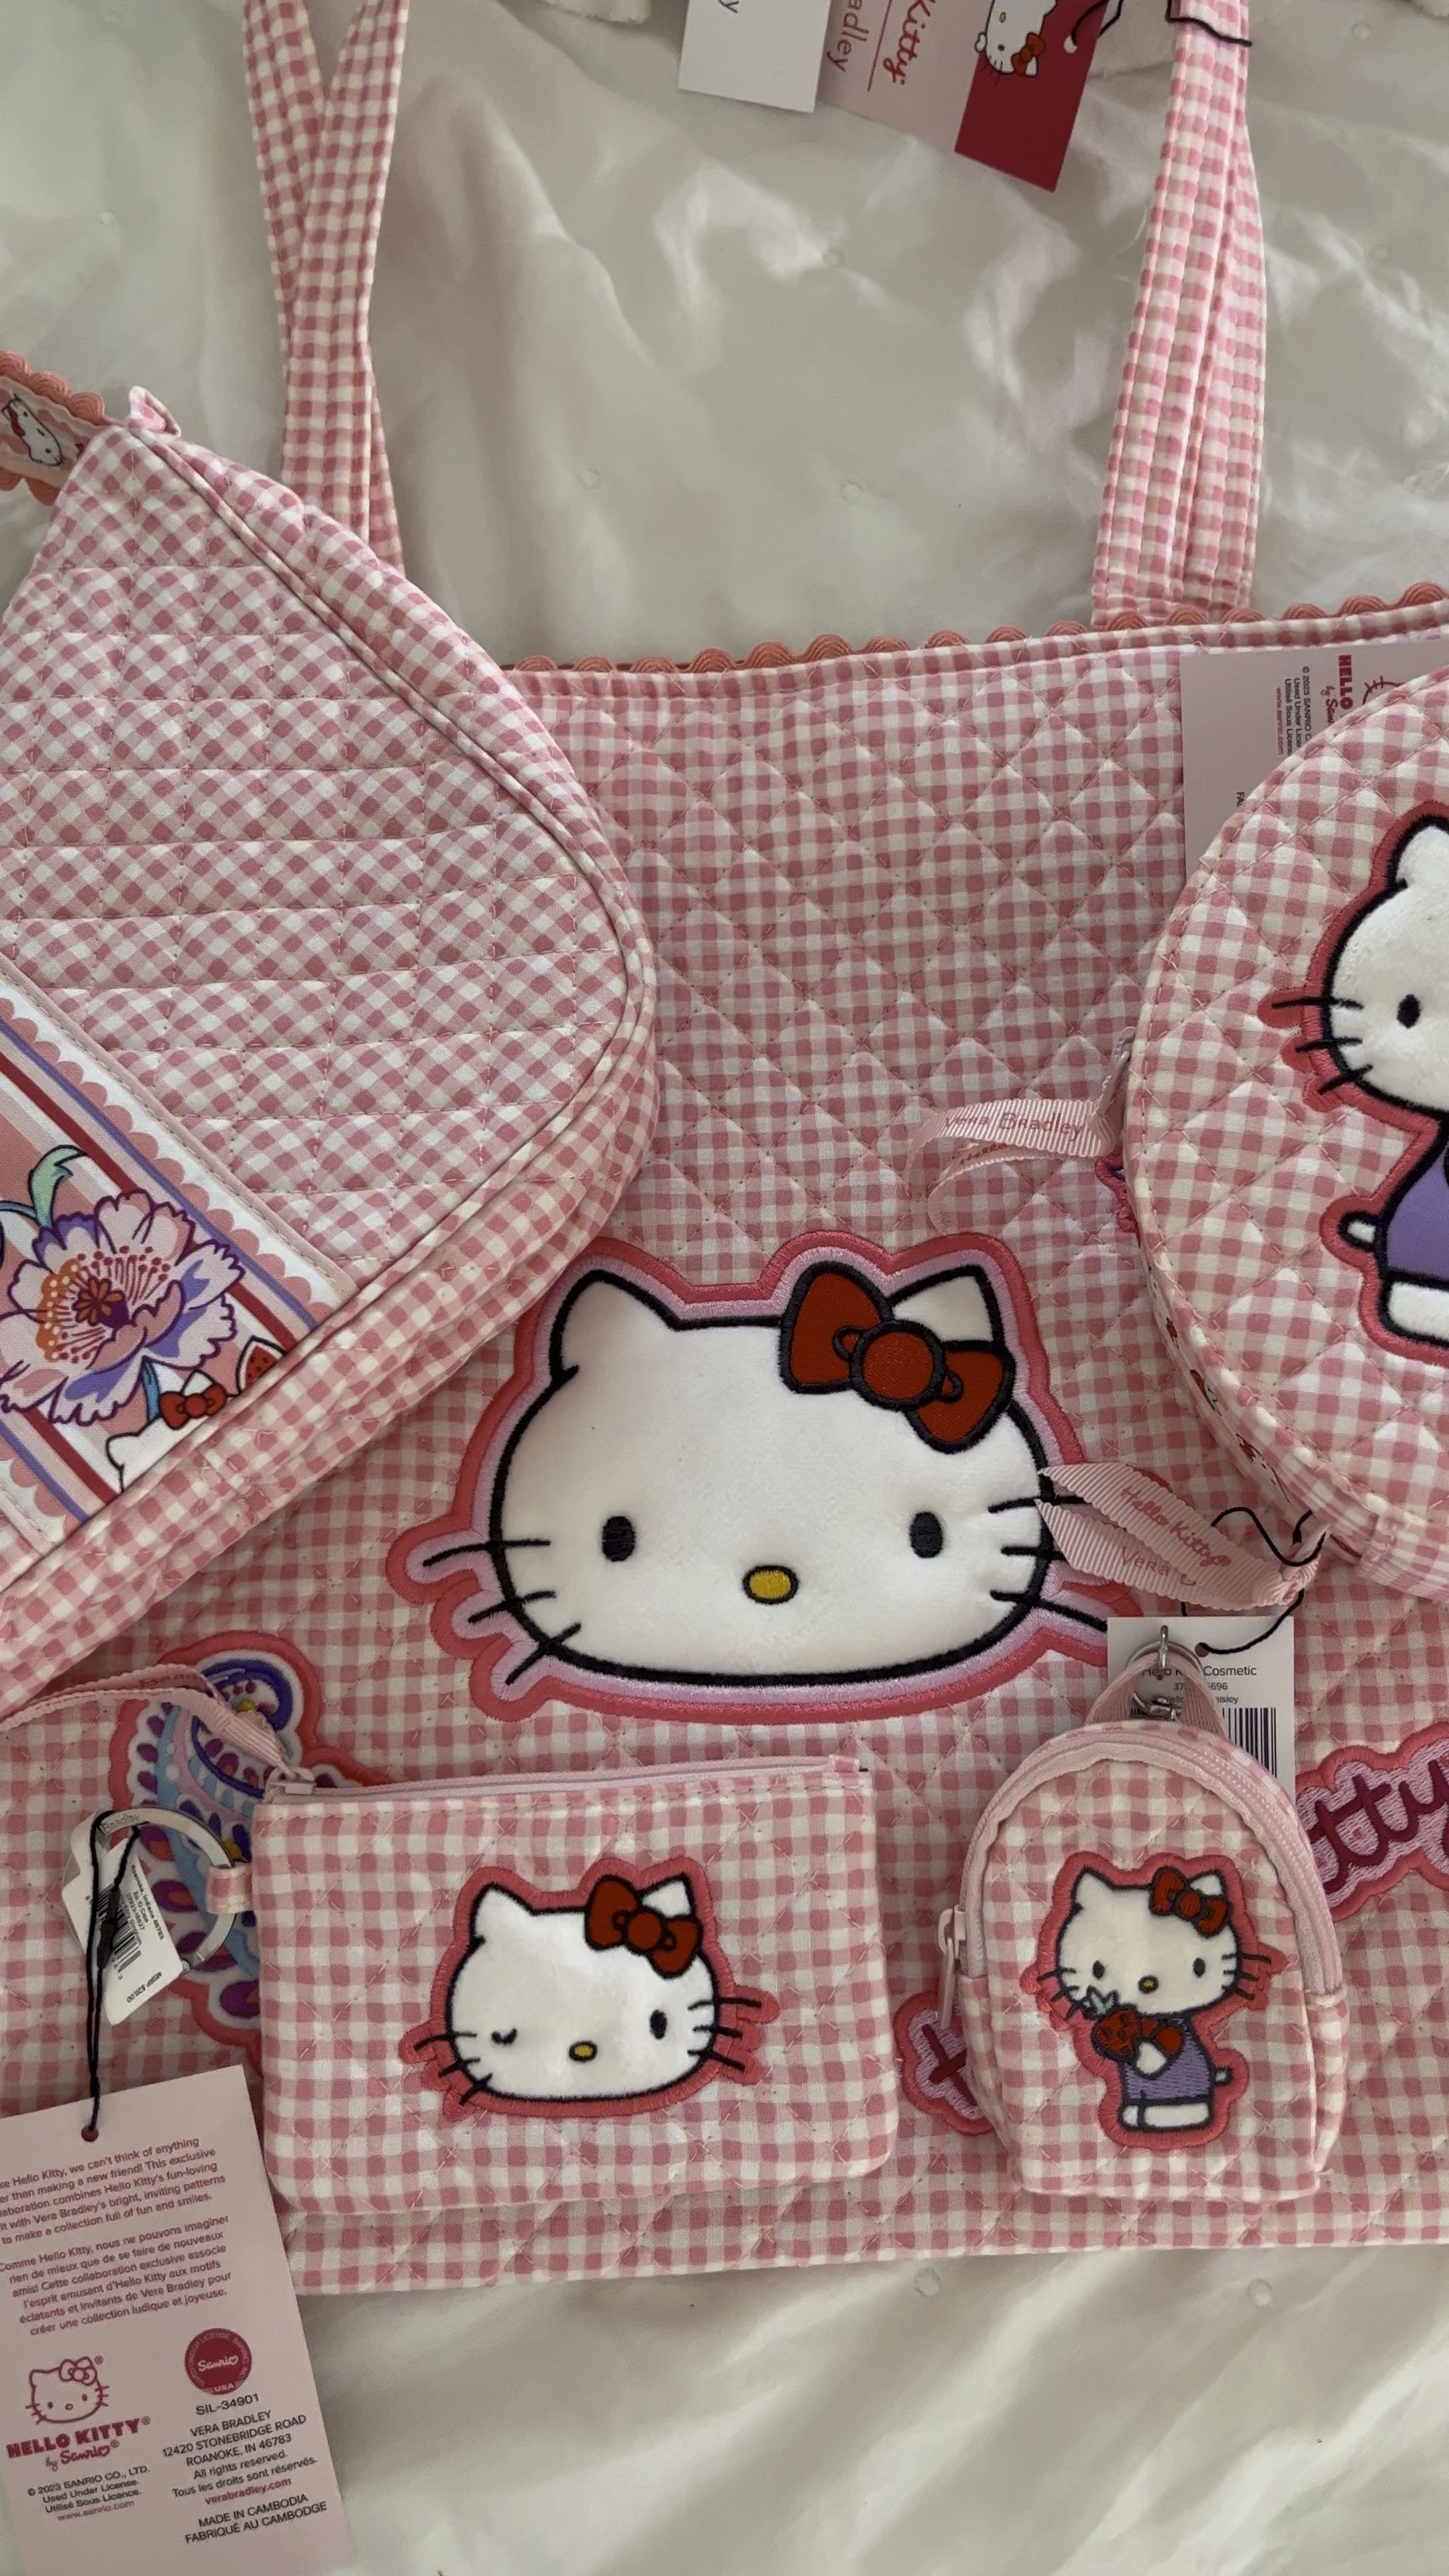 Hello Kitty Small Make Up and Accessory Bag with Plush kitty Motif